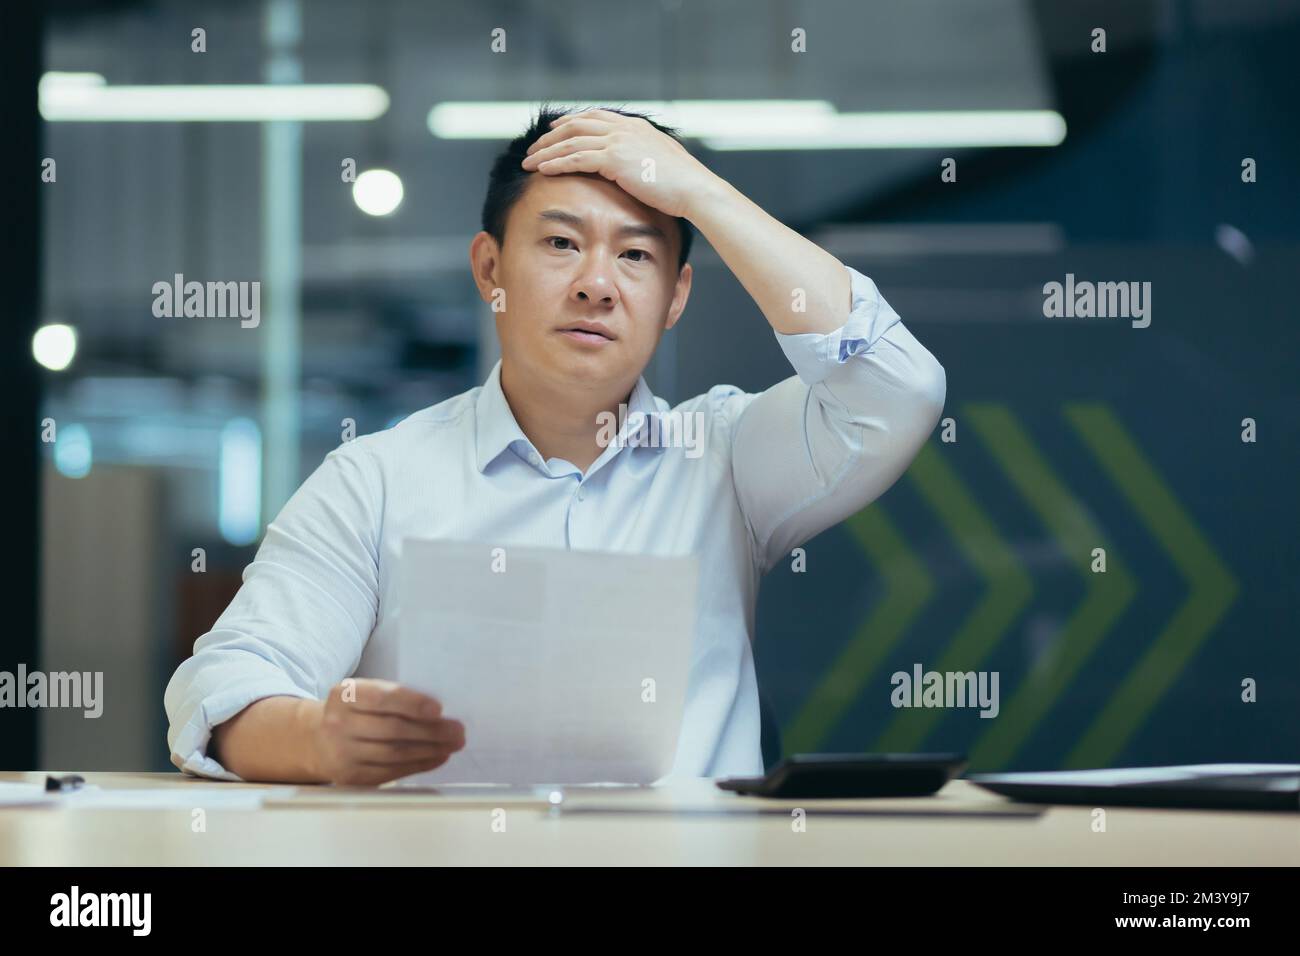 Shocked male Asian student holds a document in his hands. The worried person holds his head. Sitting at the desk in the office, received a letter, exam results, information about studies, bill. Stock Photo